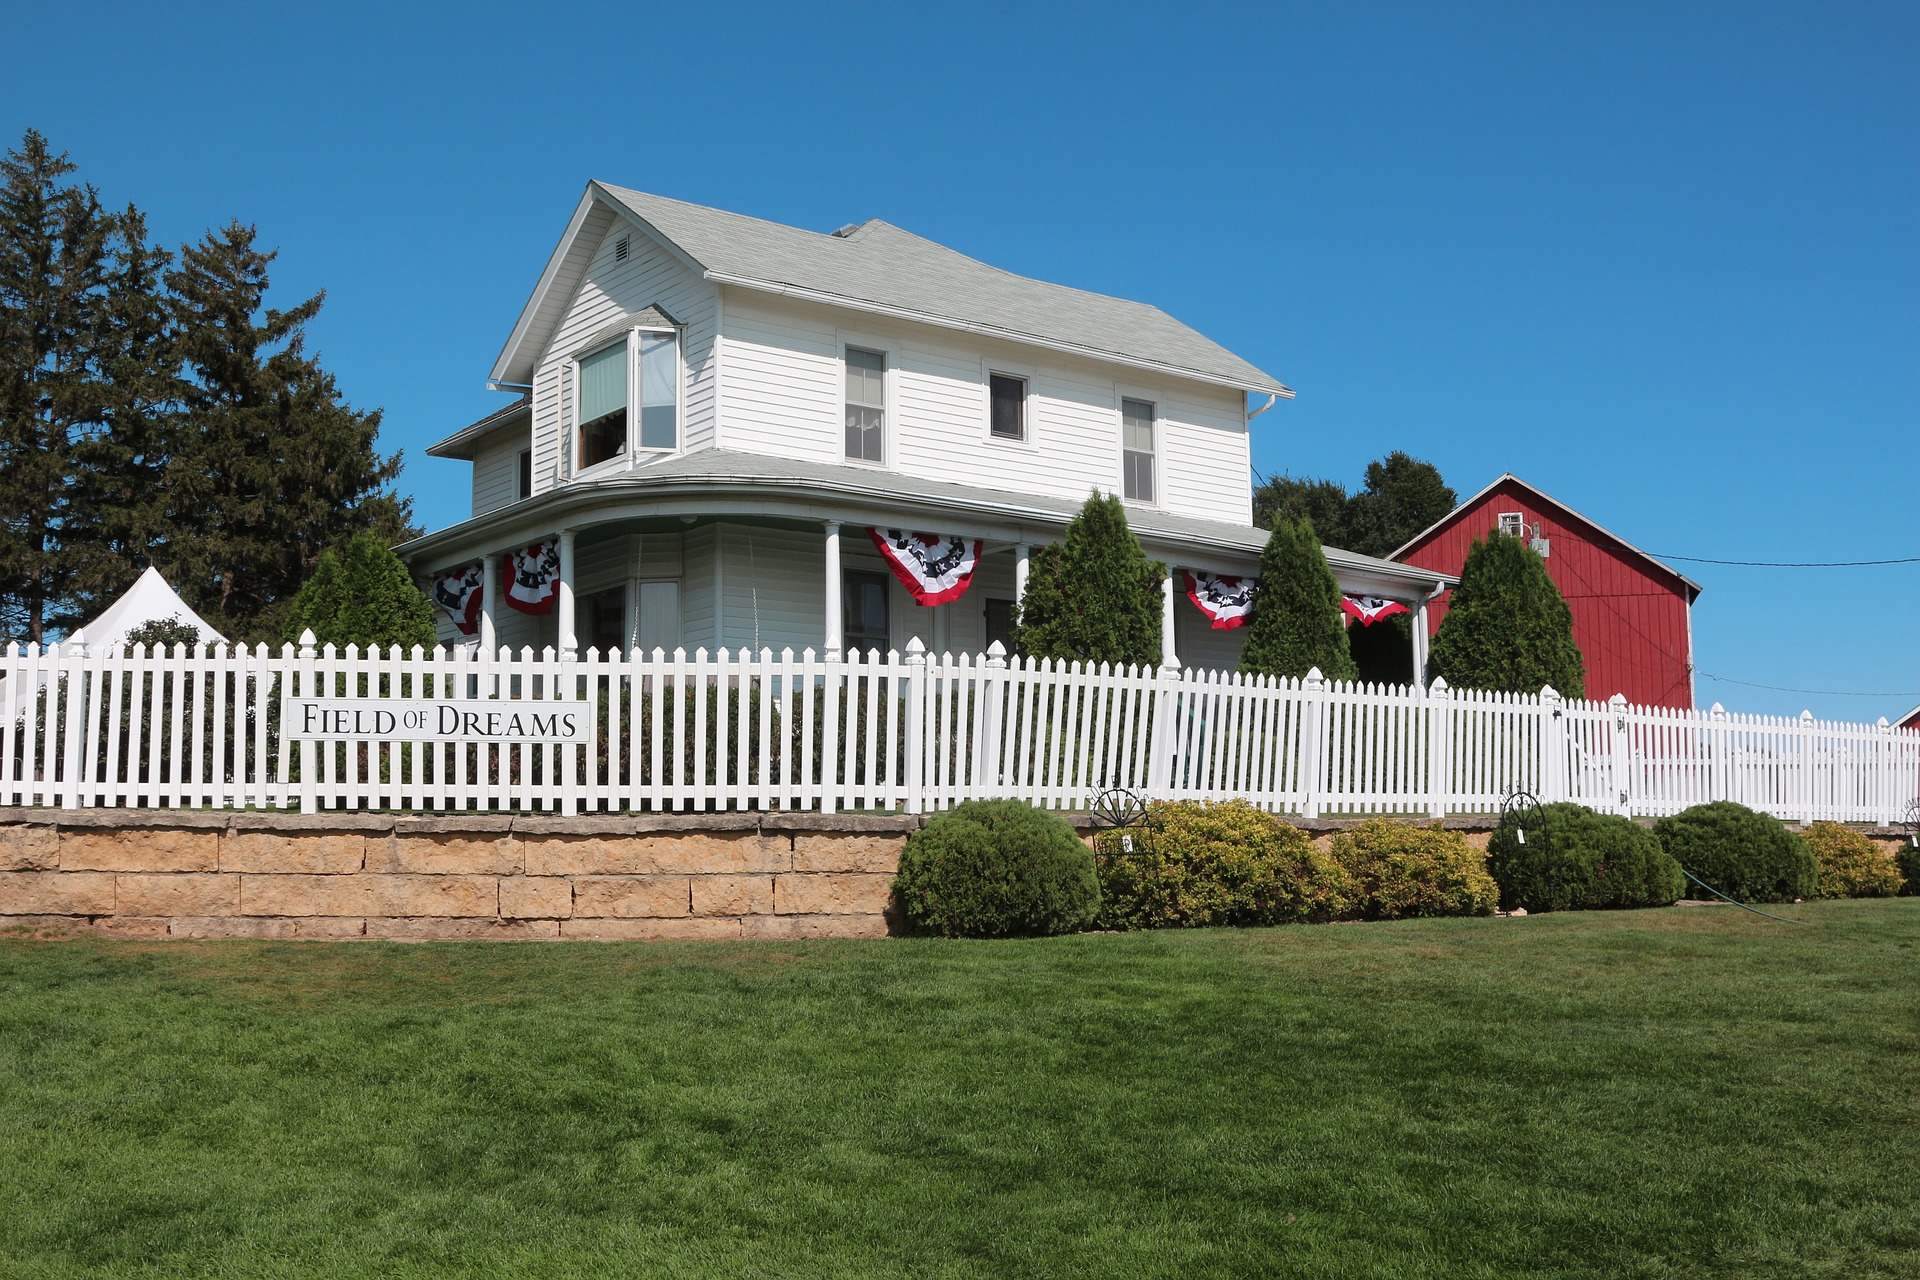 A white farmhouse with a picket fence located in Dyersville, Iowa, that was used in the baseball movie Field of Dreams.